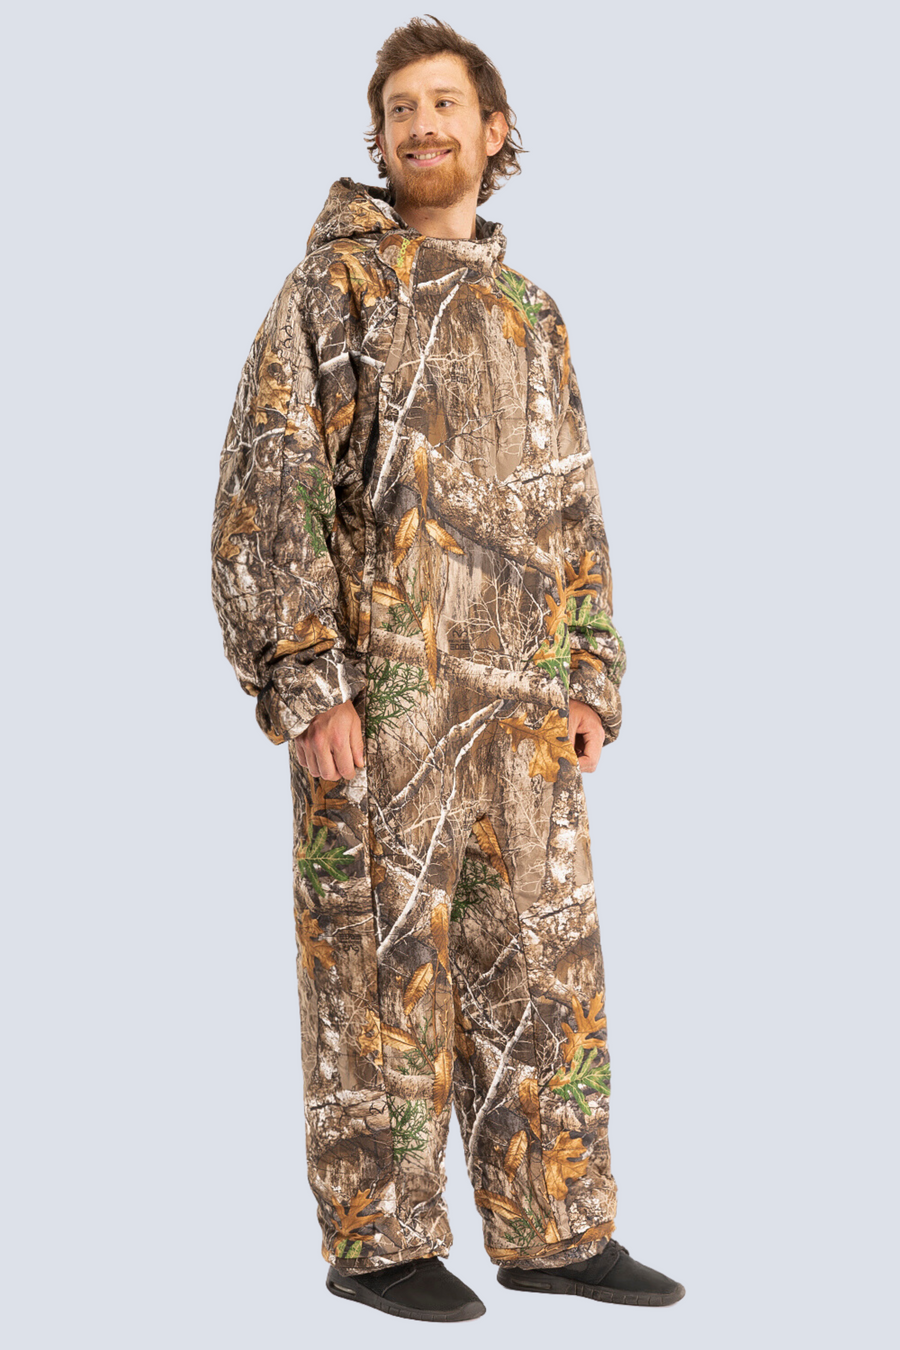 Pursuit Realtree Edge Recycled - FINAL SALE!